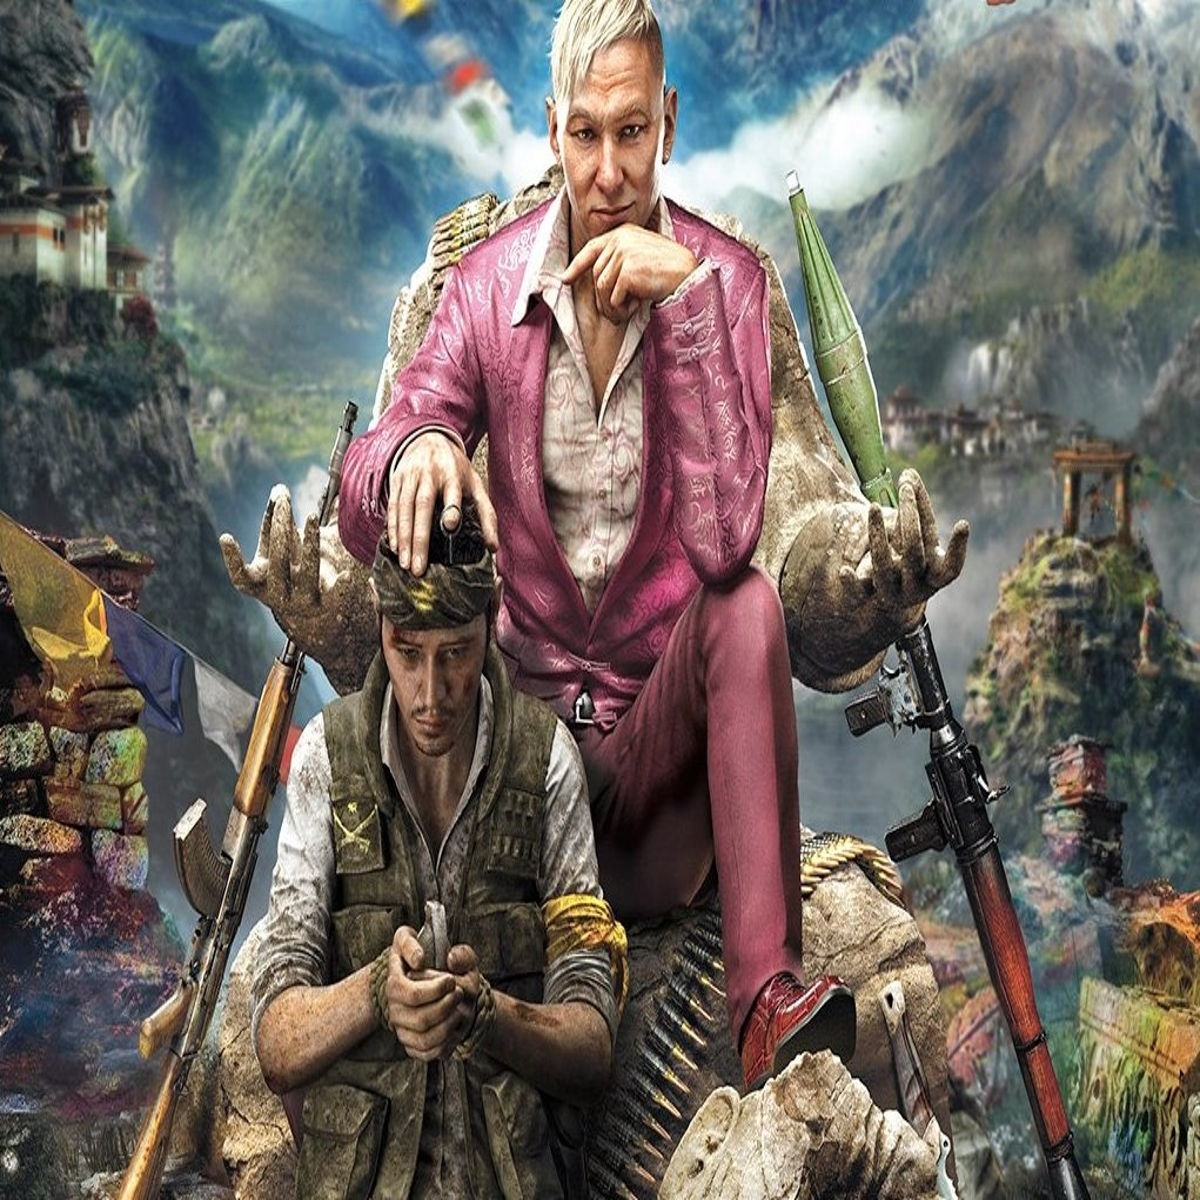 Far Cry 4 - Sony PlayStation 3 PS3 - Disc Only